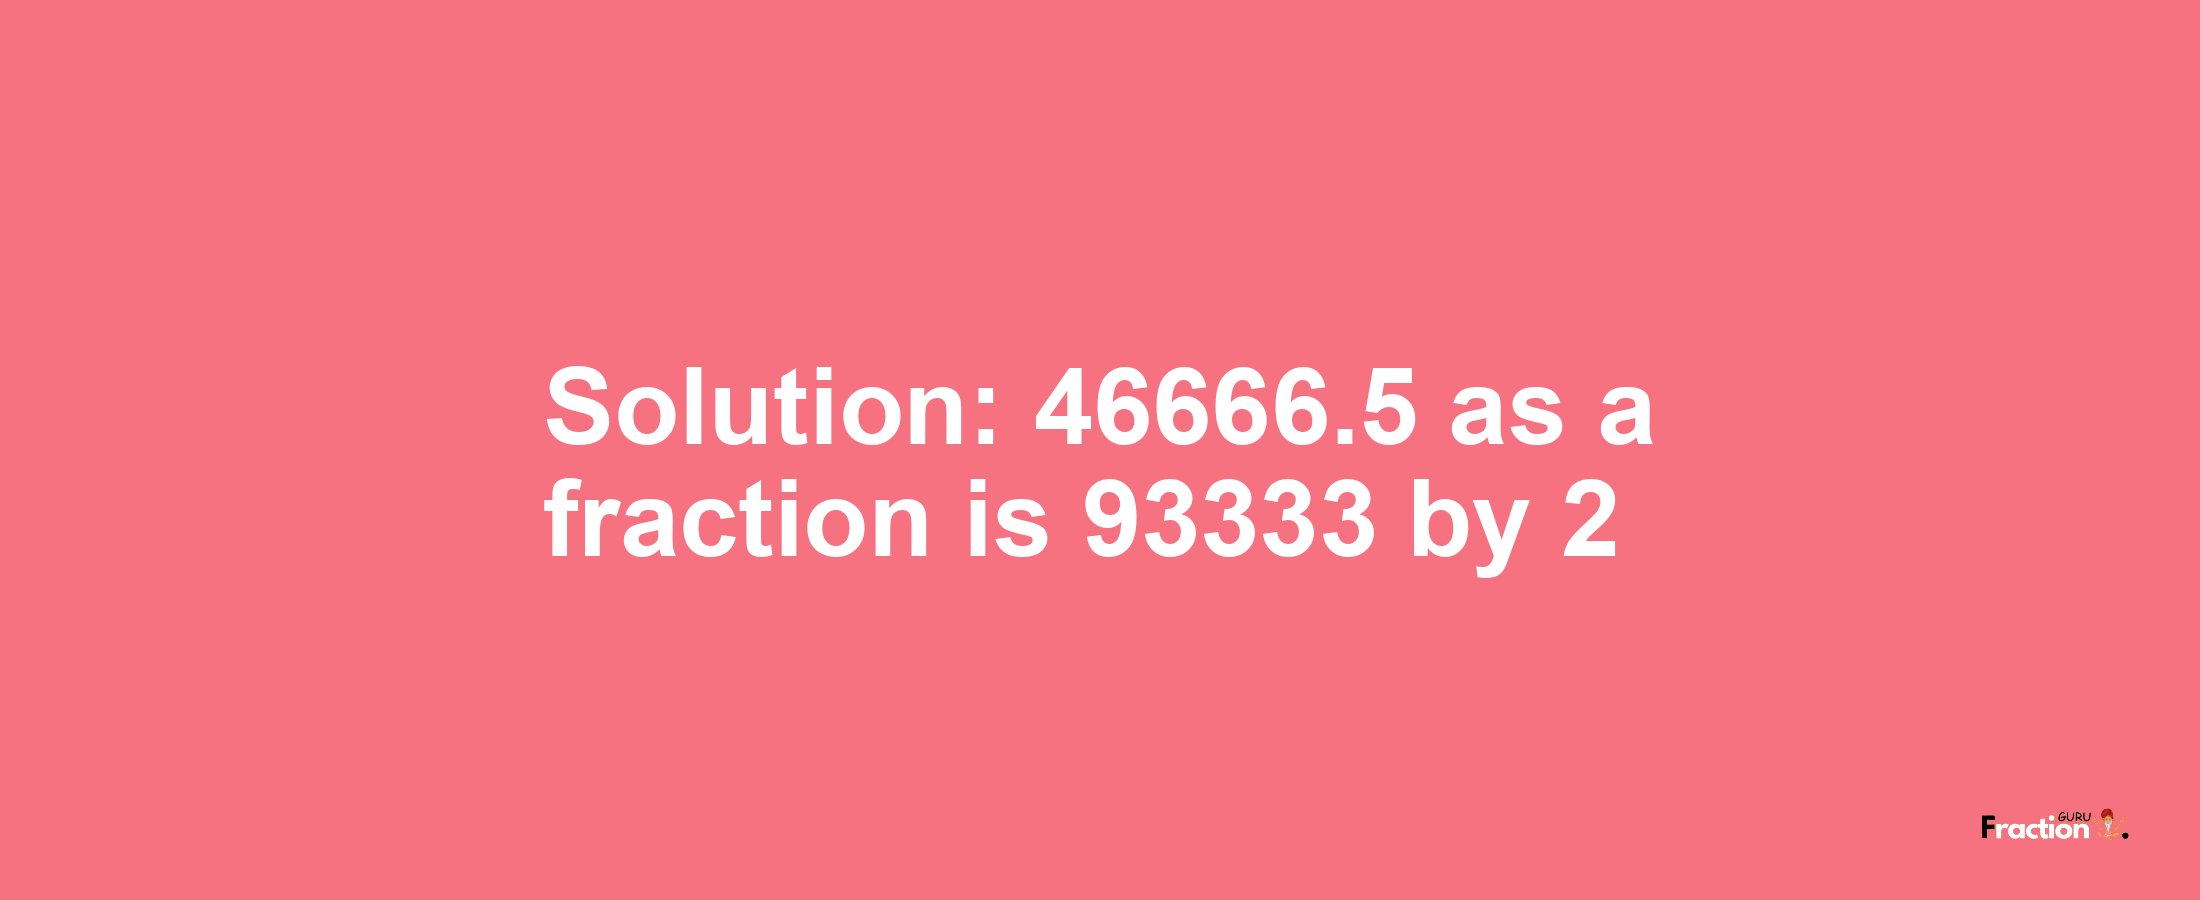 Solution:46666.5 as a fraction is 93333/2